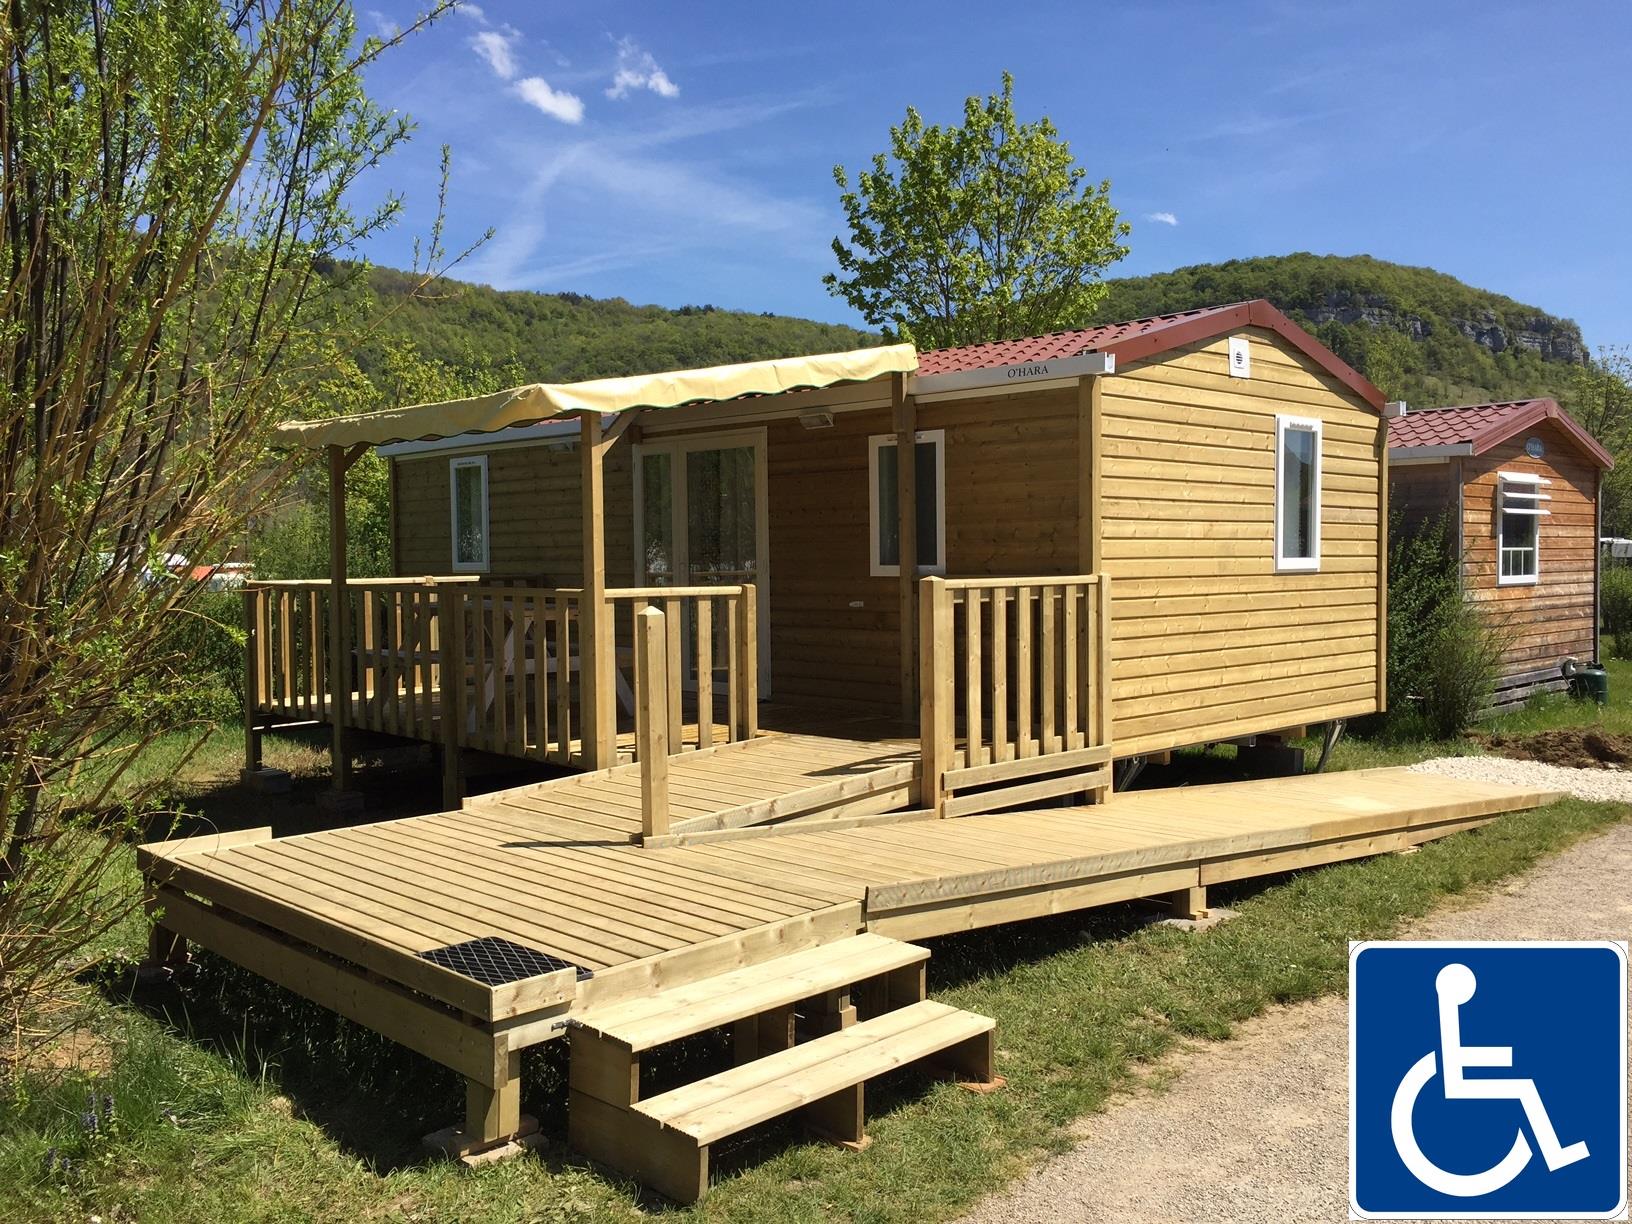 Accommodation - Cottage Caborde Adapted To The People With Reduced Mobility - 32M² - 2 Bedrooms, Entirely Accessible To The Wheel Chairs - Camping Ecologique LA ROCHE D'ULLY